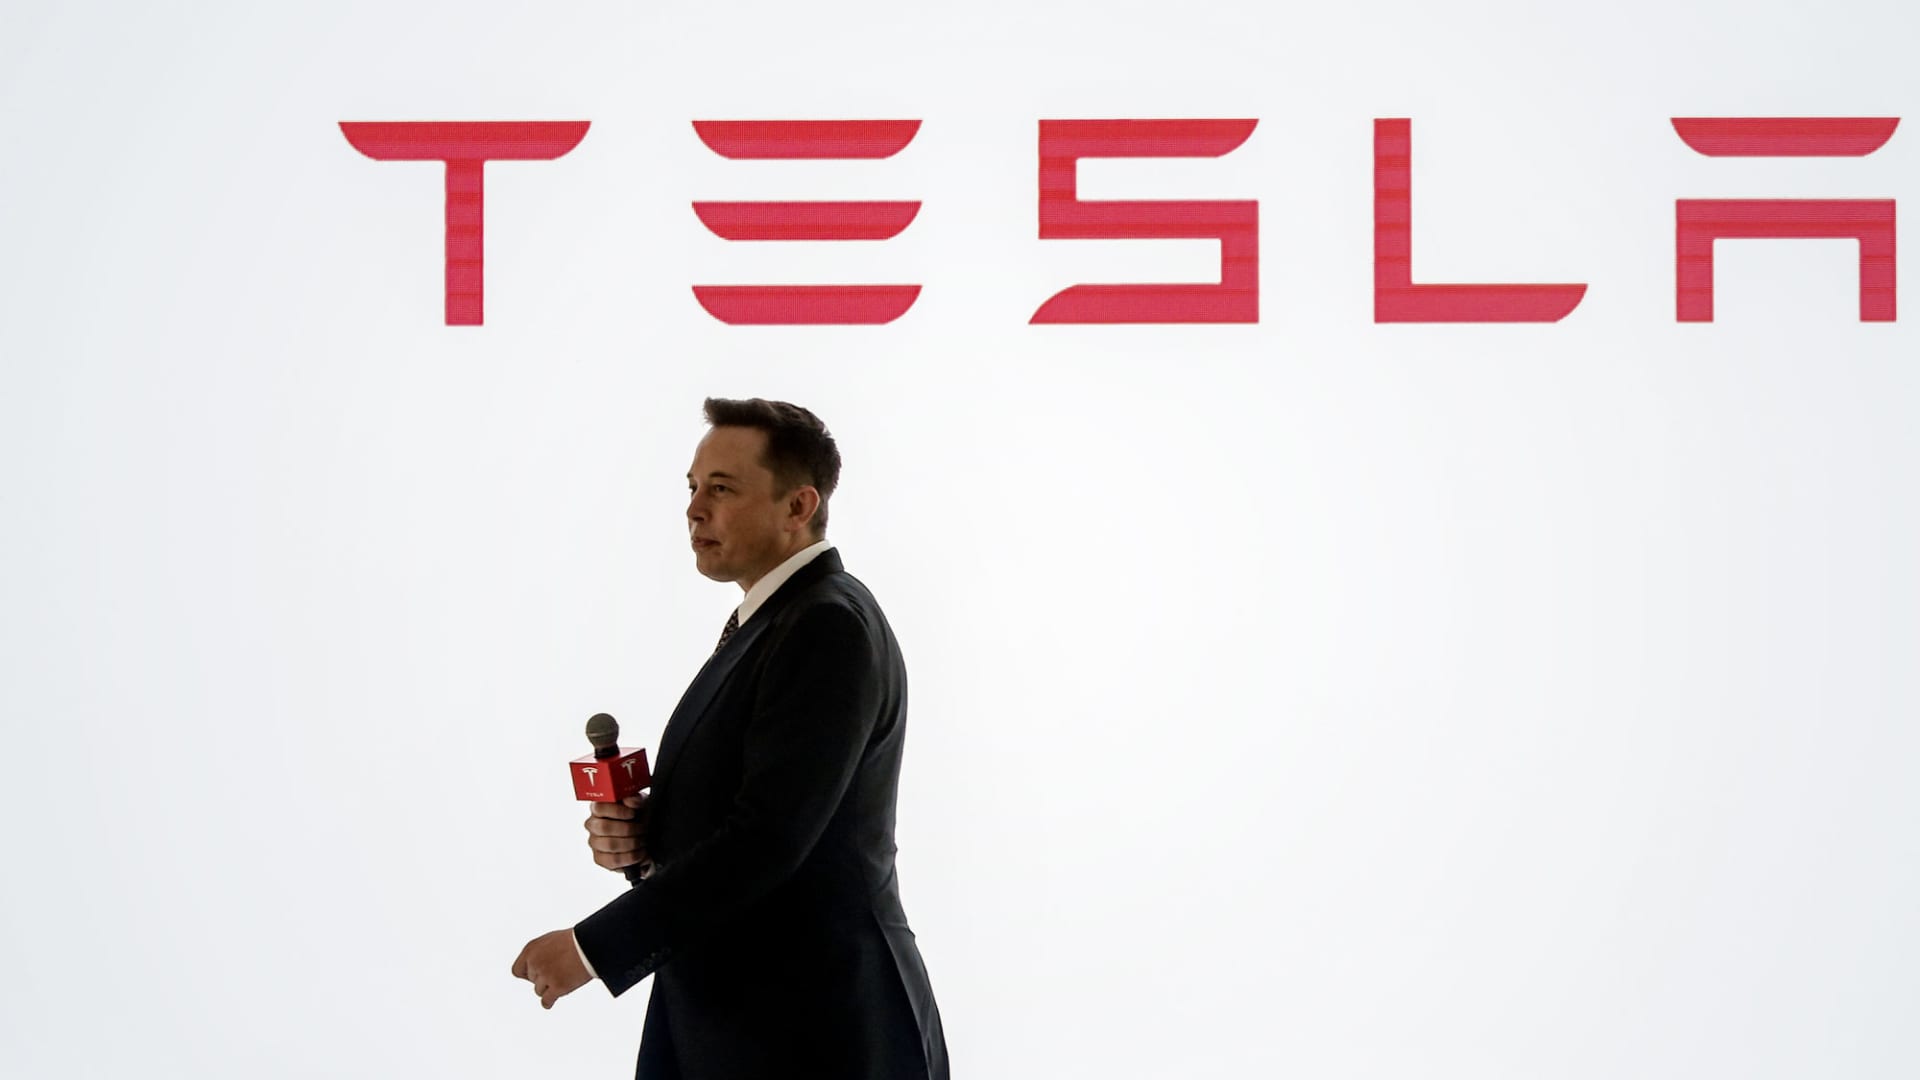 Cramer sees 'huge positives' on Tesla's Battery Day, tells investors to be patient on stock